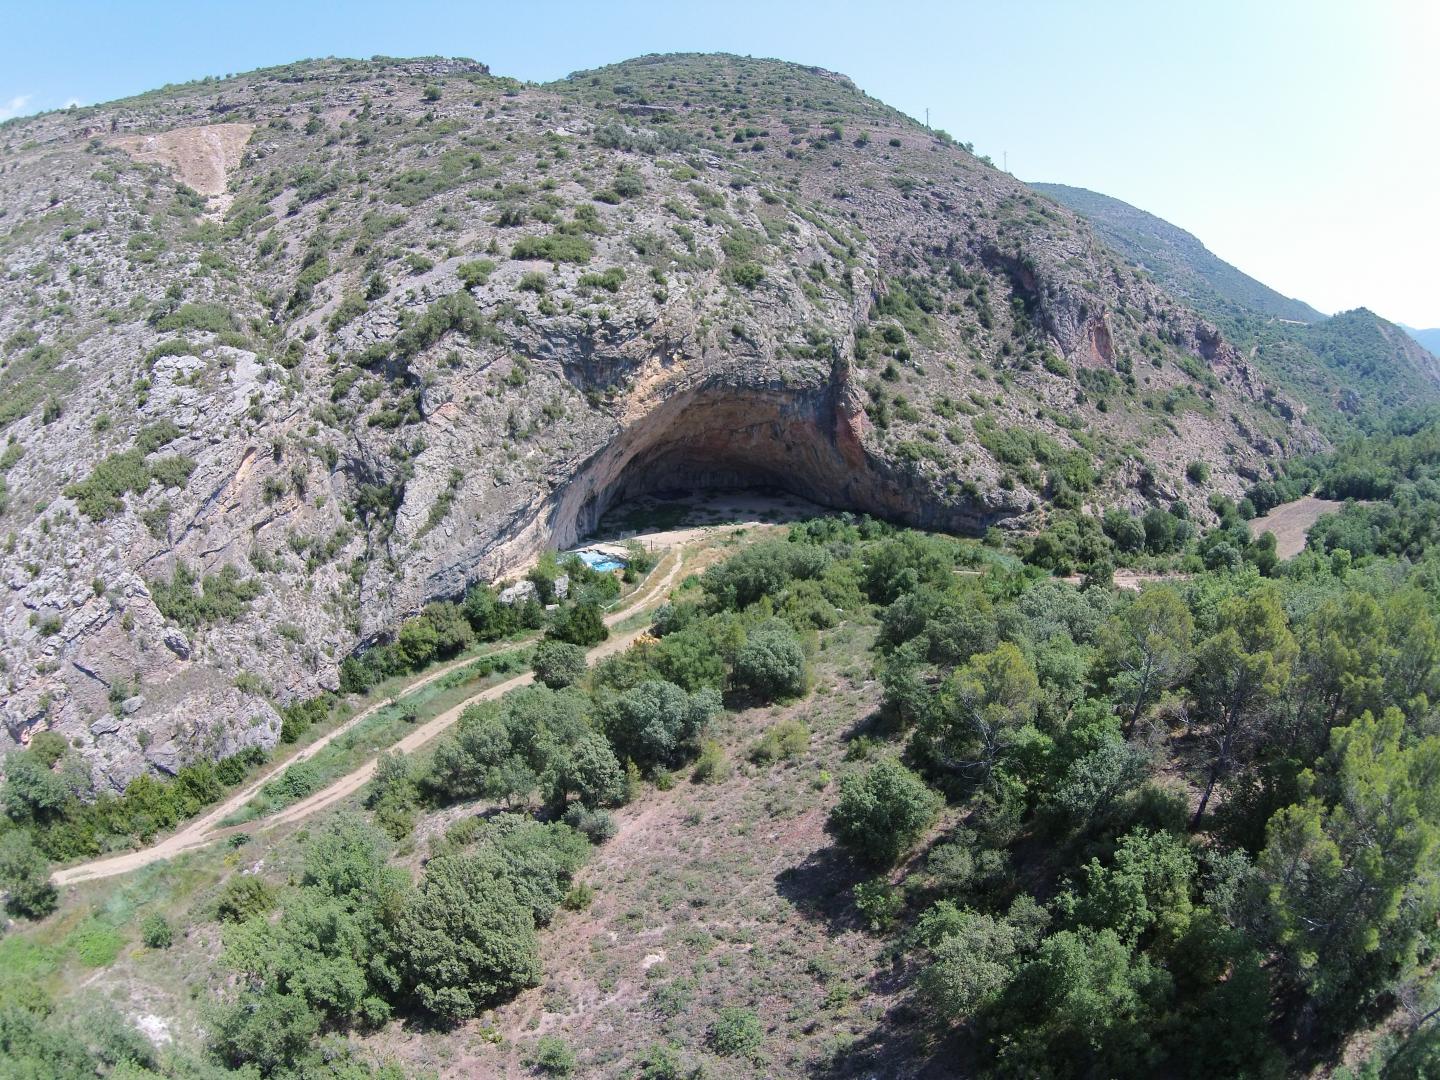 Montane Pine Forests Reached the Northeastern Coast of the Iberian Peninsula 50,000 Years Ago